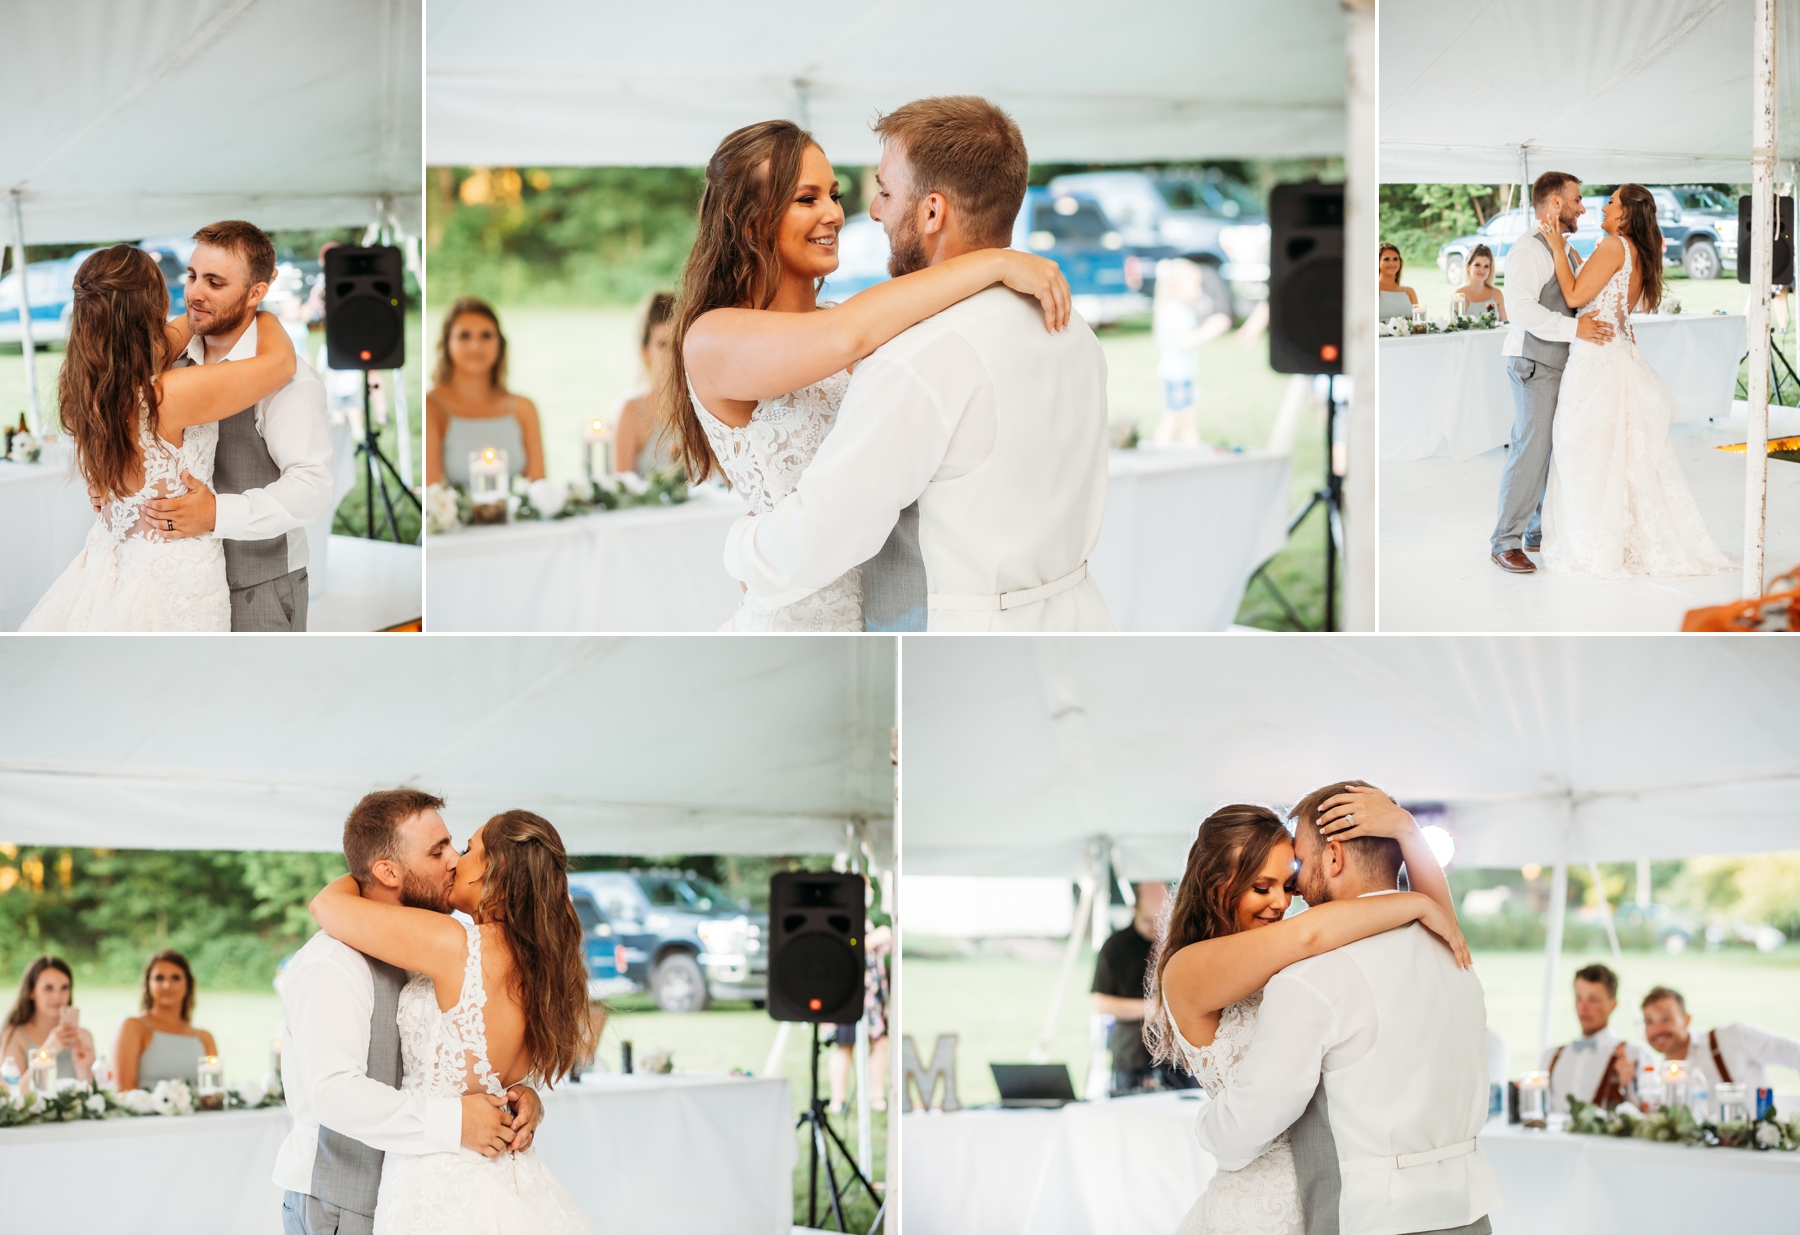 backyard wedding photography bates city missouri bride and groom brittany jewell photography first dance reception white tent